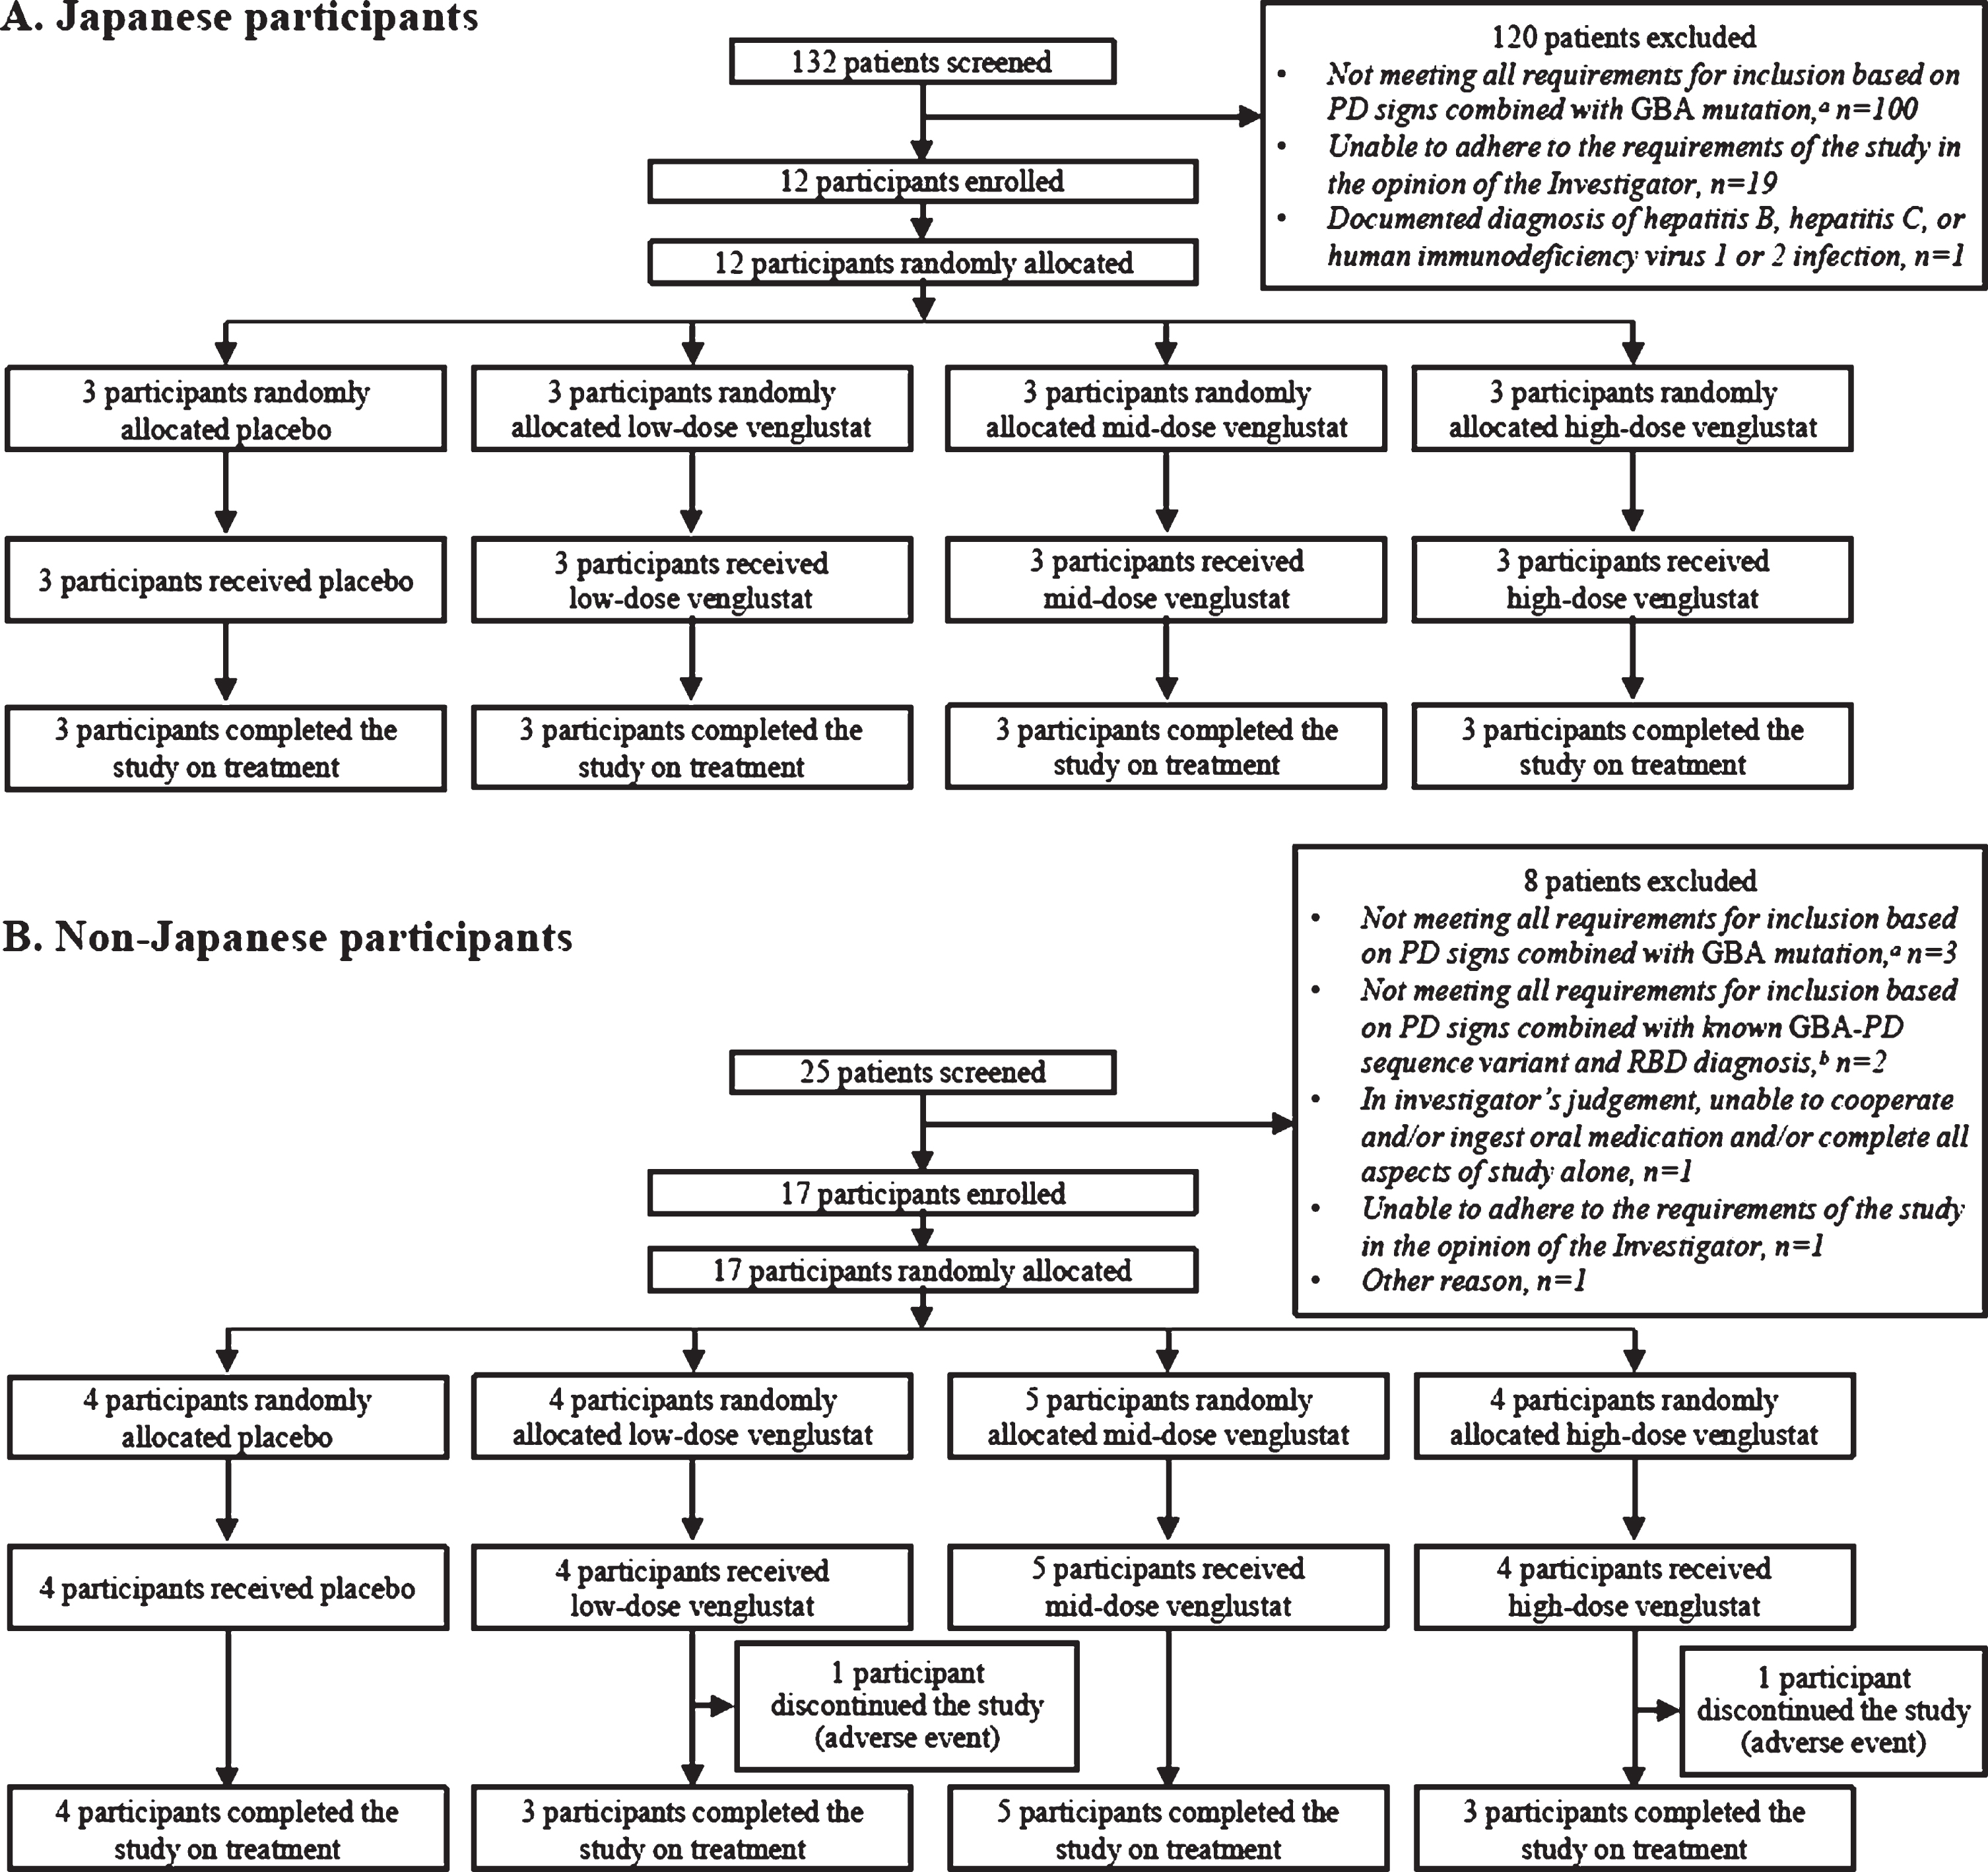 CONSORT diagram: disposition of participants enrolled in Part 1 of the MOVES-PD trial. Two non-Japanese participants permanently discontinued the study due to adverse events after receiving venglustat and post week 4 (one participant [low dose] discontinued due to confusional state, and one participant [high dose] due to a panic attack). aInclusion criterion: male or female patients with a diagnosis of PD (with at least two of the following signs: resting tremor, postural instability, akinesia/hypokinesia, and muscle rigidity) and who are heterozygous carriers of a GBA mutation. bInclusion criterion: patients carrying known sequence variants associated with GBA-PD, in addition to having a diagnosis of PD (with at least two of the following signs: resting tremor, postural instability, akinesia/hypokinesia, or muscle rigidity), must also have a diagnosis of RBD confirmed by historically documented polysomnography or by RBD screening questionnaire. GBA, glucocerebrosidase (glucosylceramidase beta) gene; PD, Parkinson’s disease; RBD, rapid eye movement sleep behavior disorder.